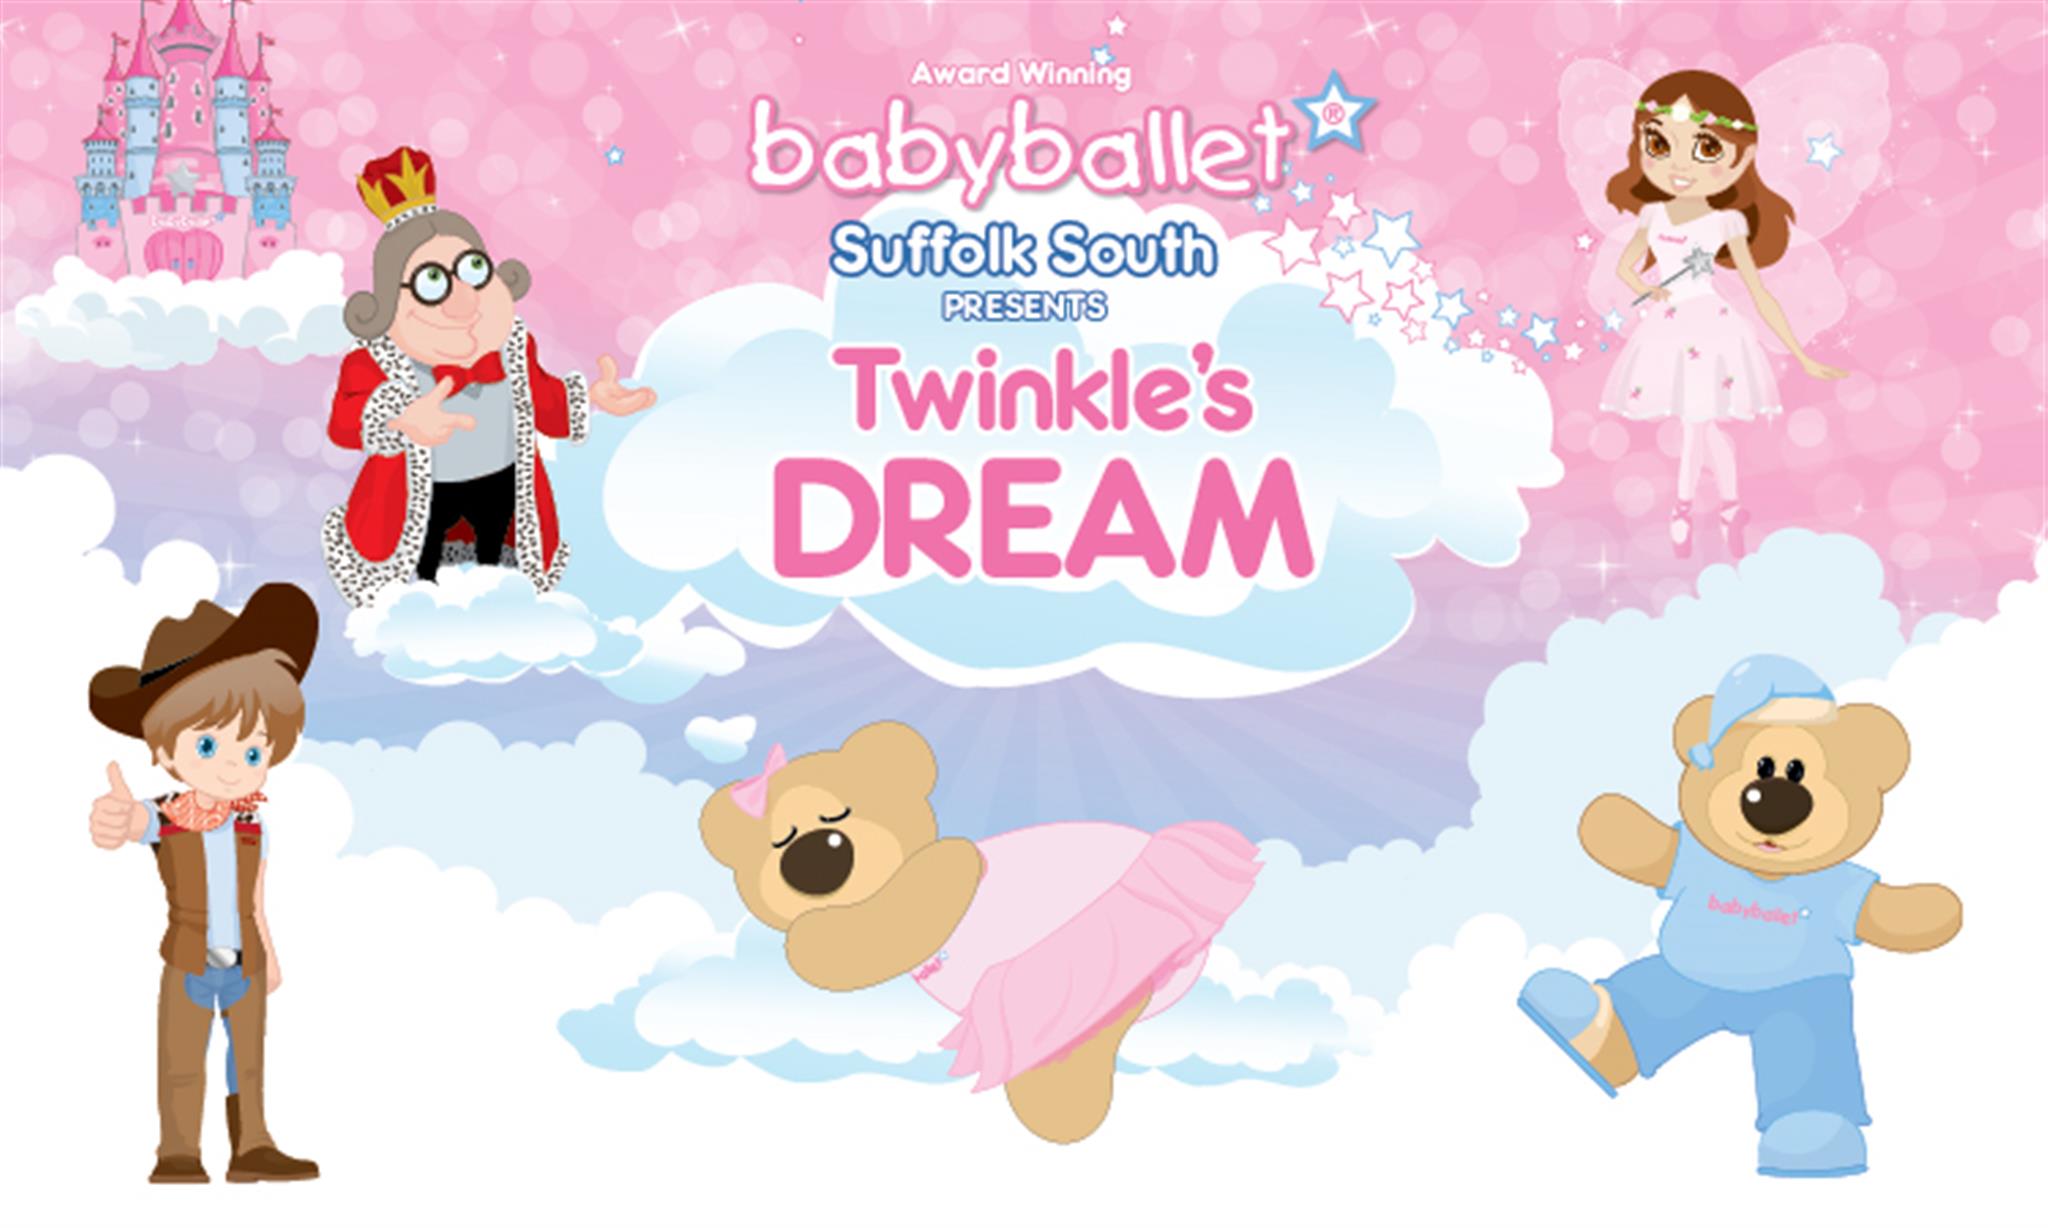 Twinkle's Dream by babyballet Suffolk South